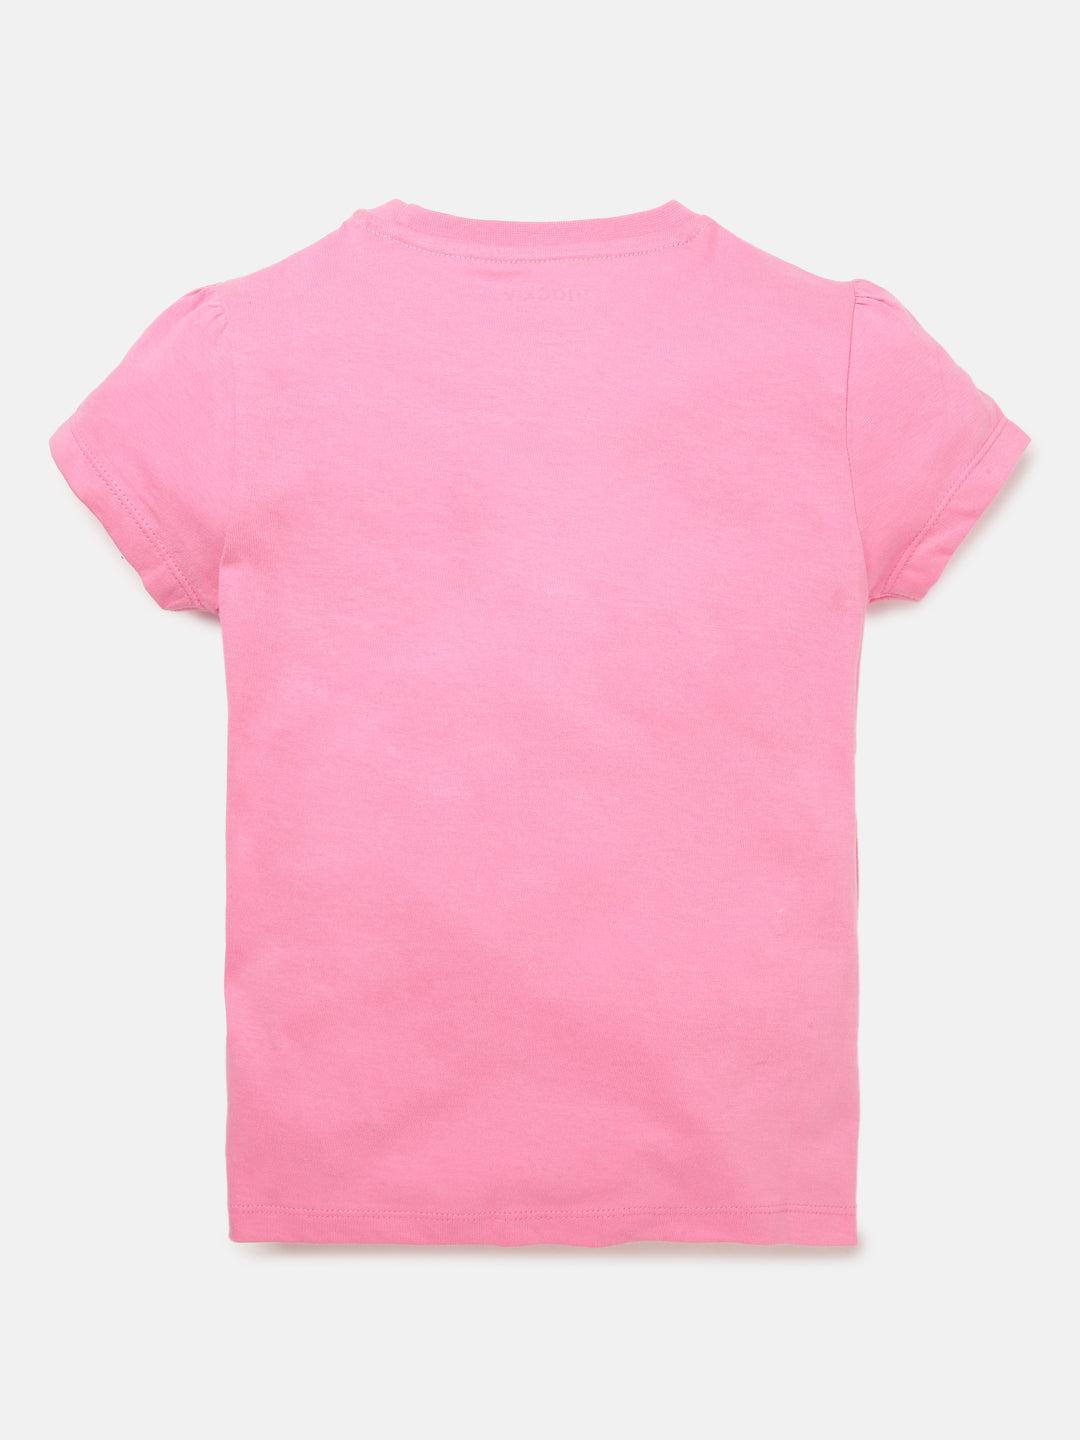 Girls Printed Embroidered Cotton T-Shirt